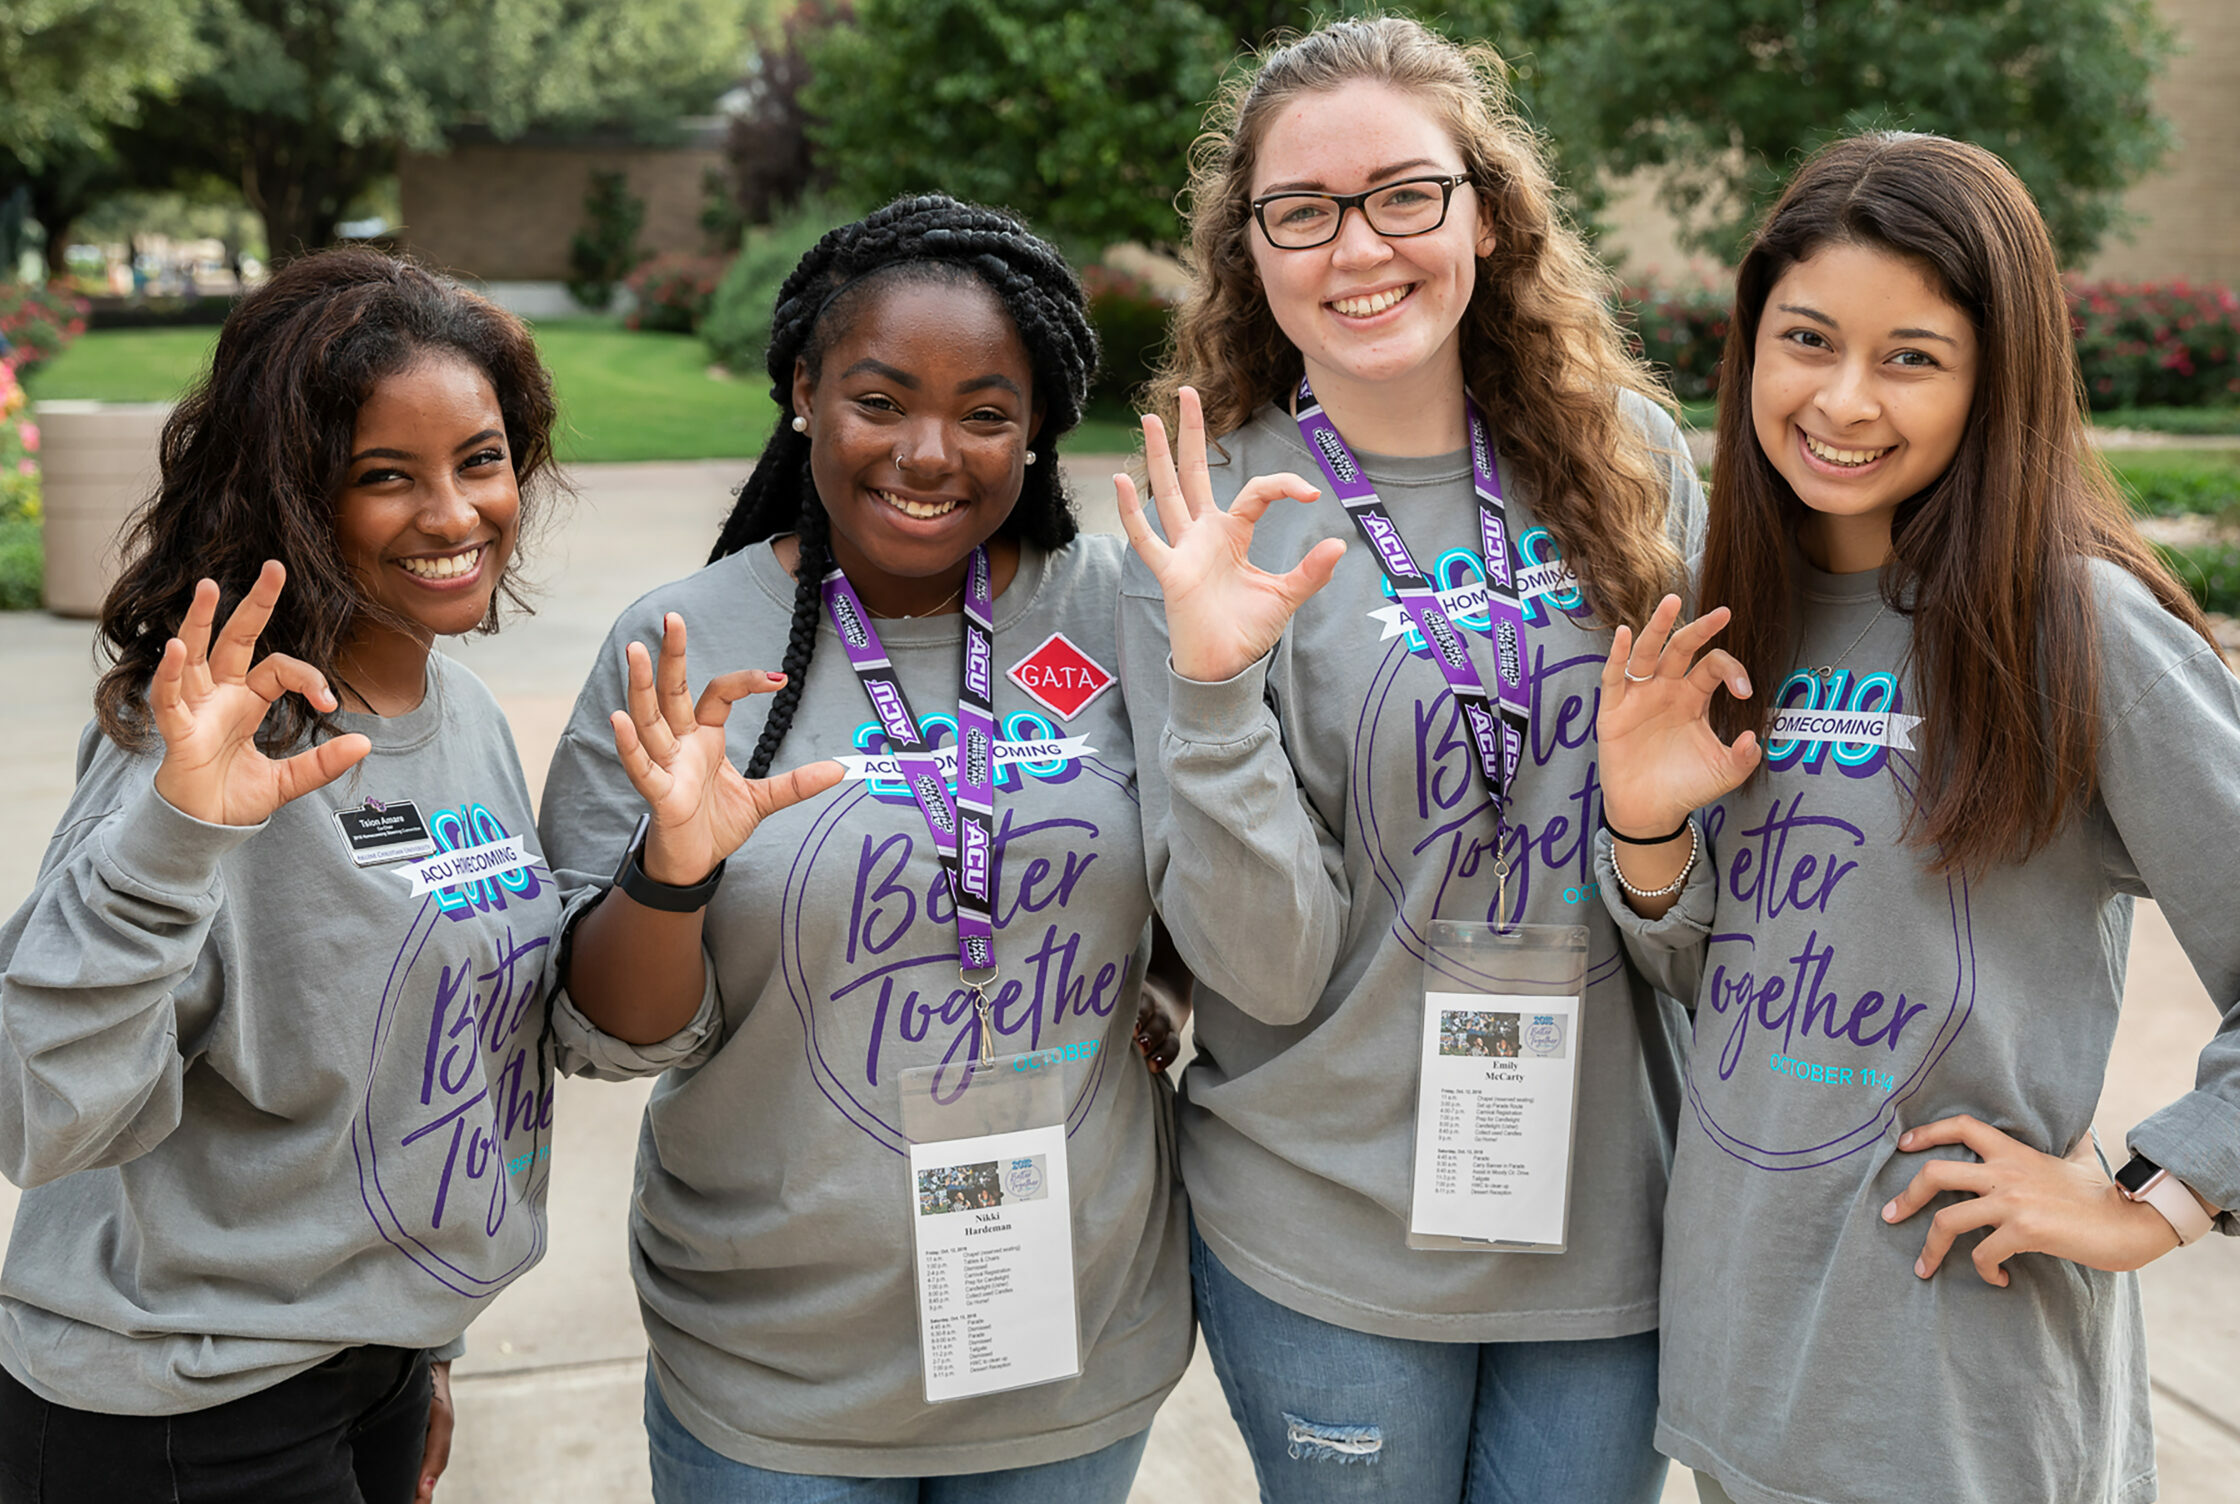 Four ACU students making the W-C hand symbol